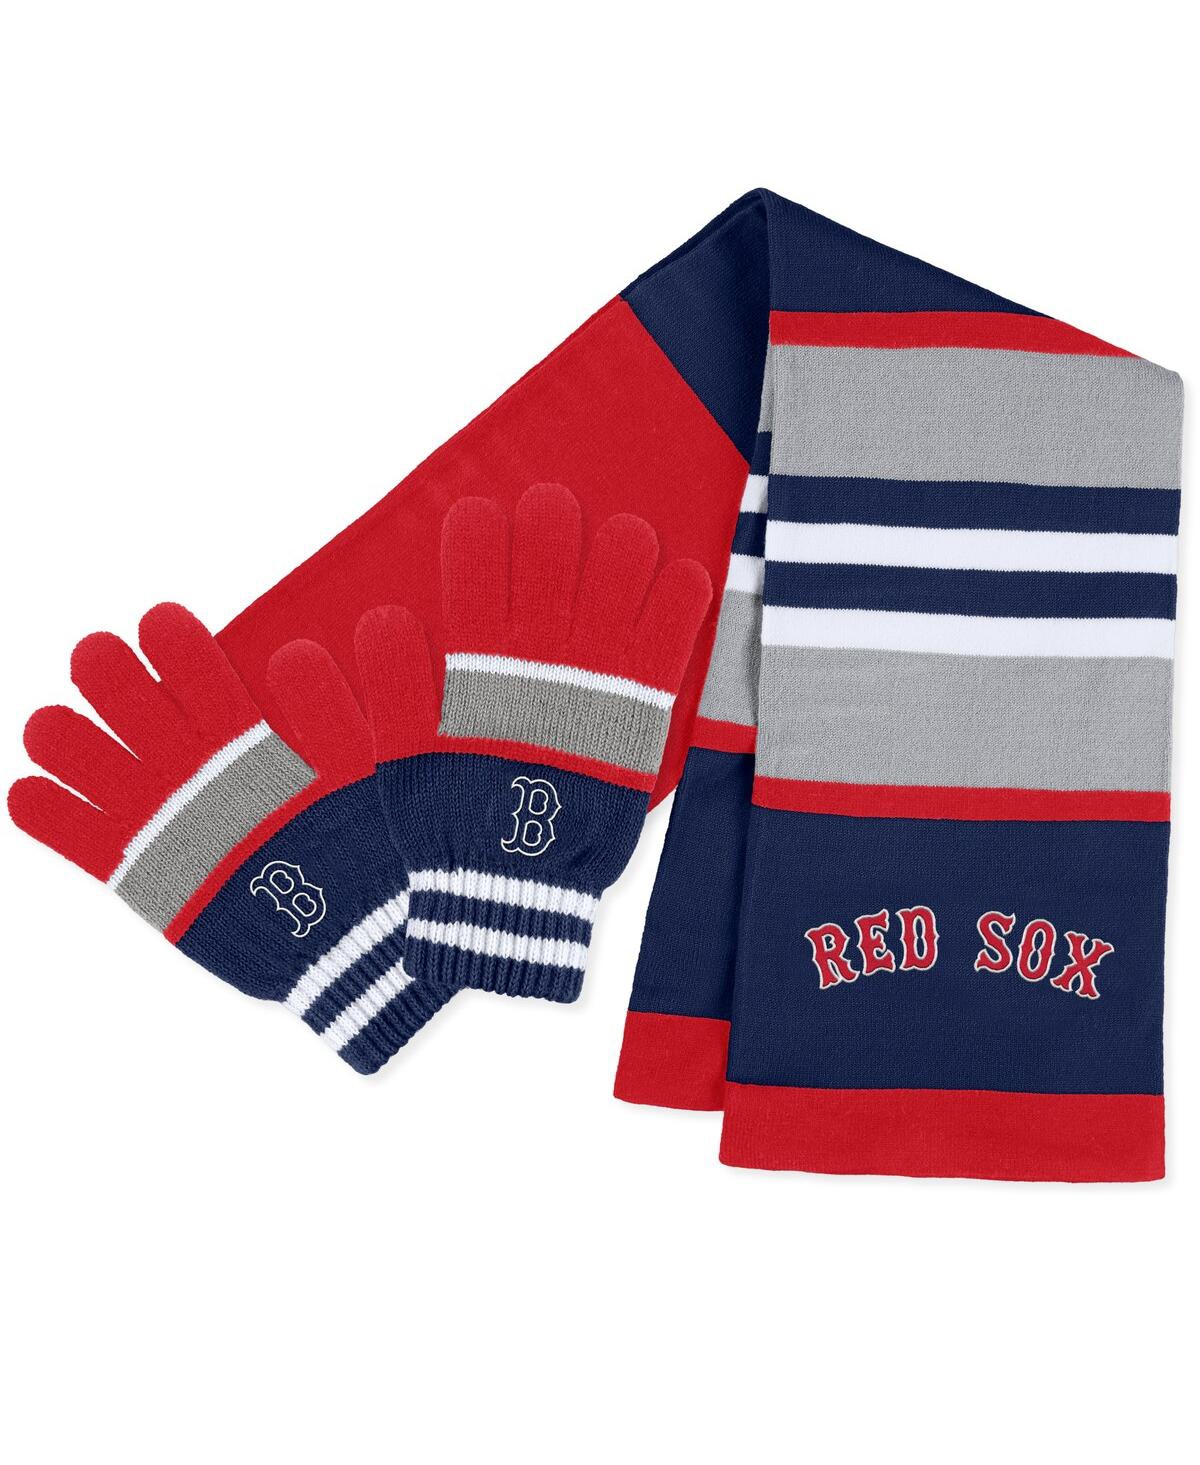 Women's Wear by Erin Andrews Boston Red Sox Stripe Glove and Scarf Set - Multi